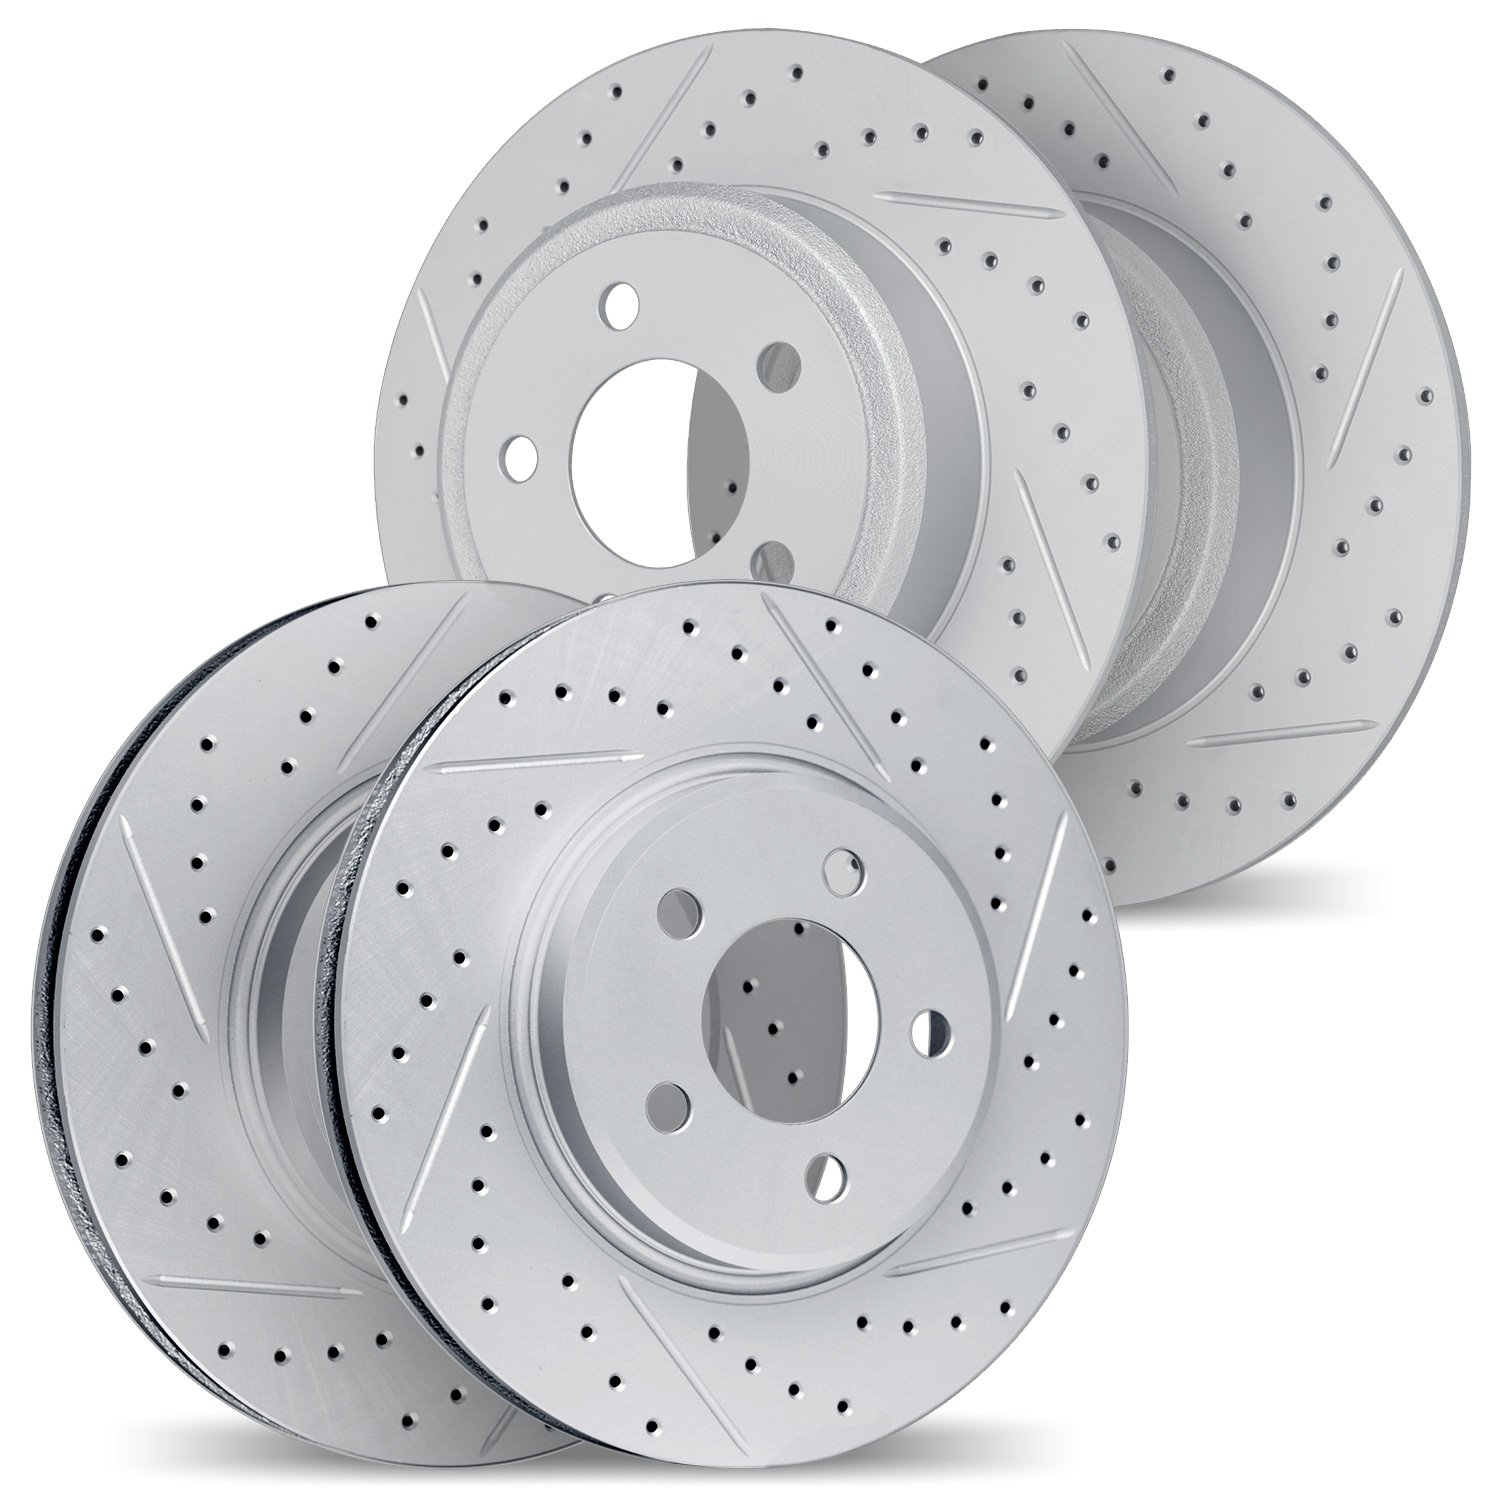 2004-76057 Geoperformance Drilled/Slotted Brake Rotors, Fits Select Lexus/Toyota/Scion, Position: Front and Rear